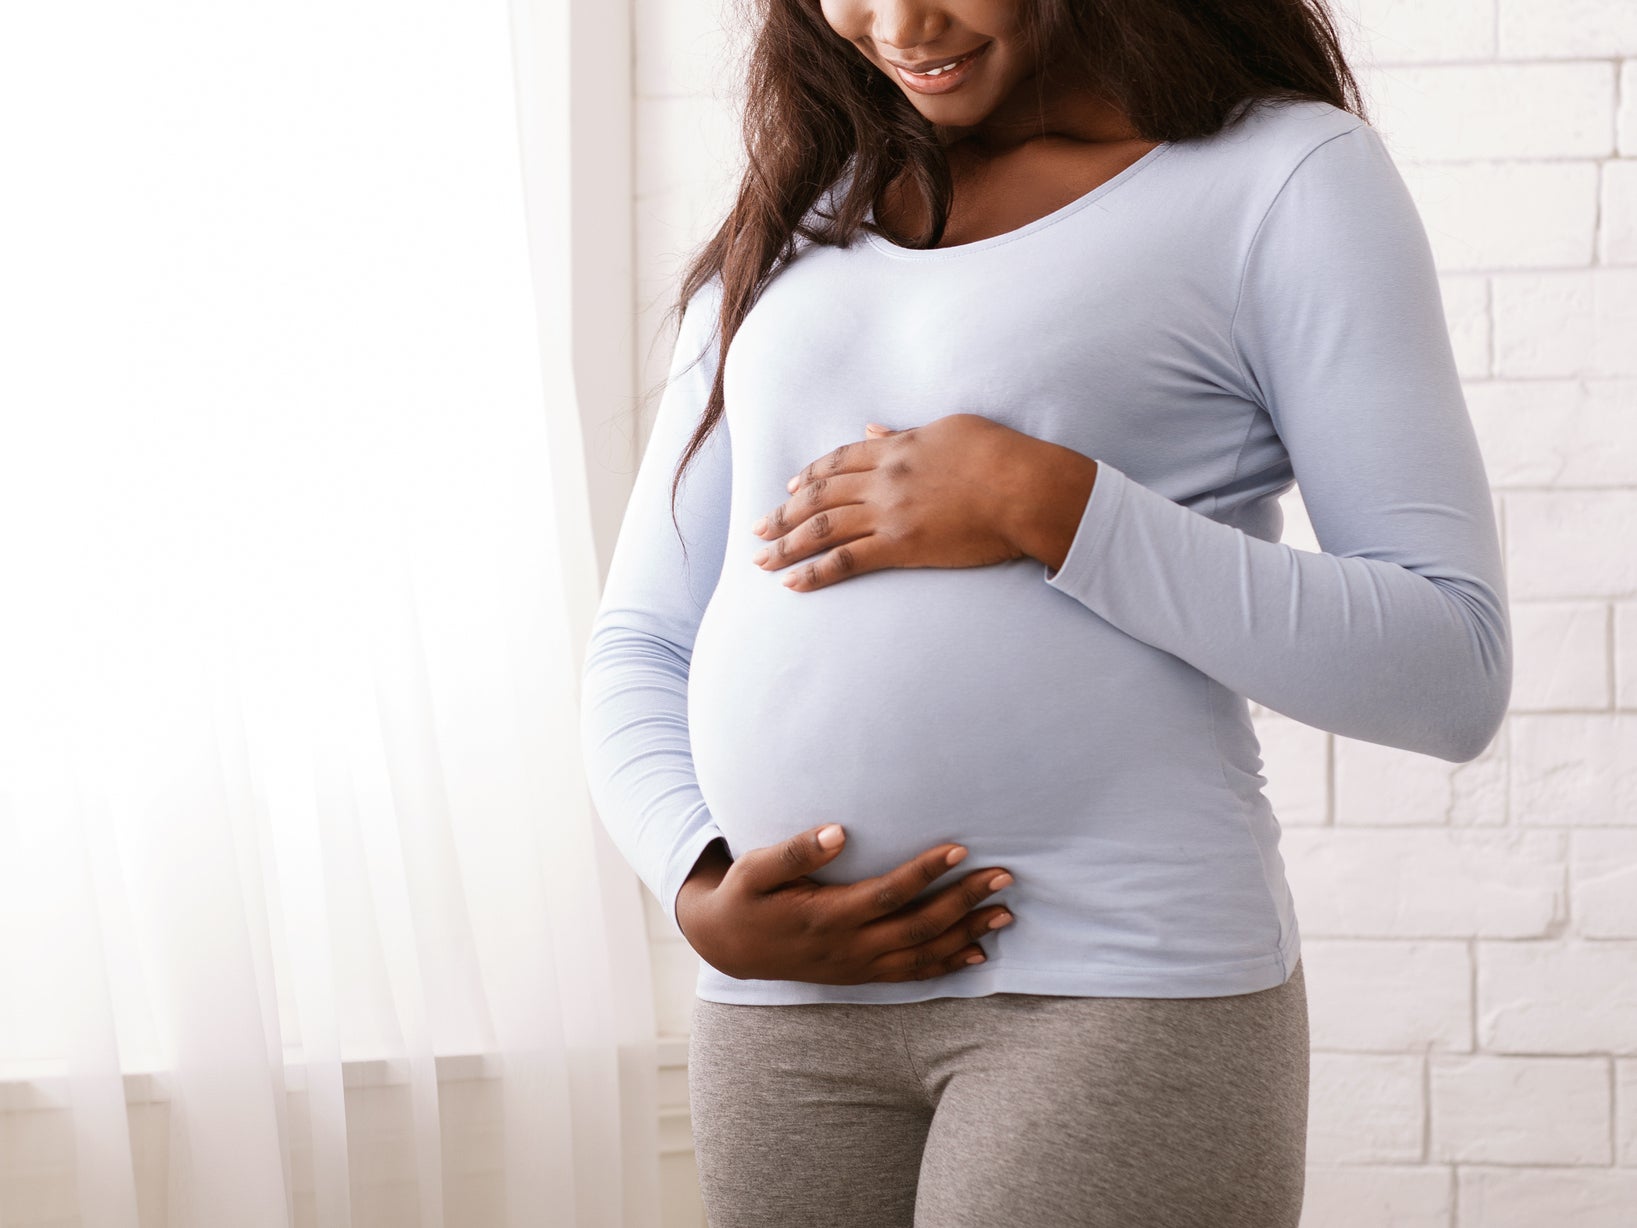 Black women are four times more likely to die in pregnancy or childbirth in the UK